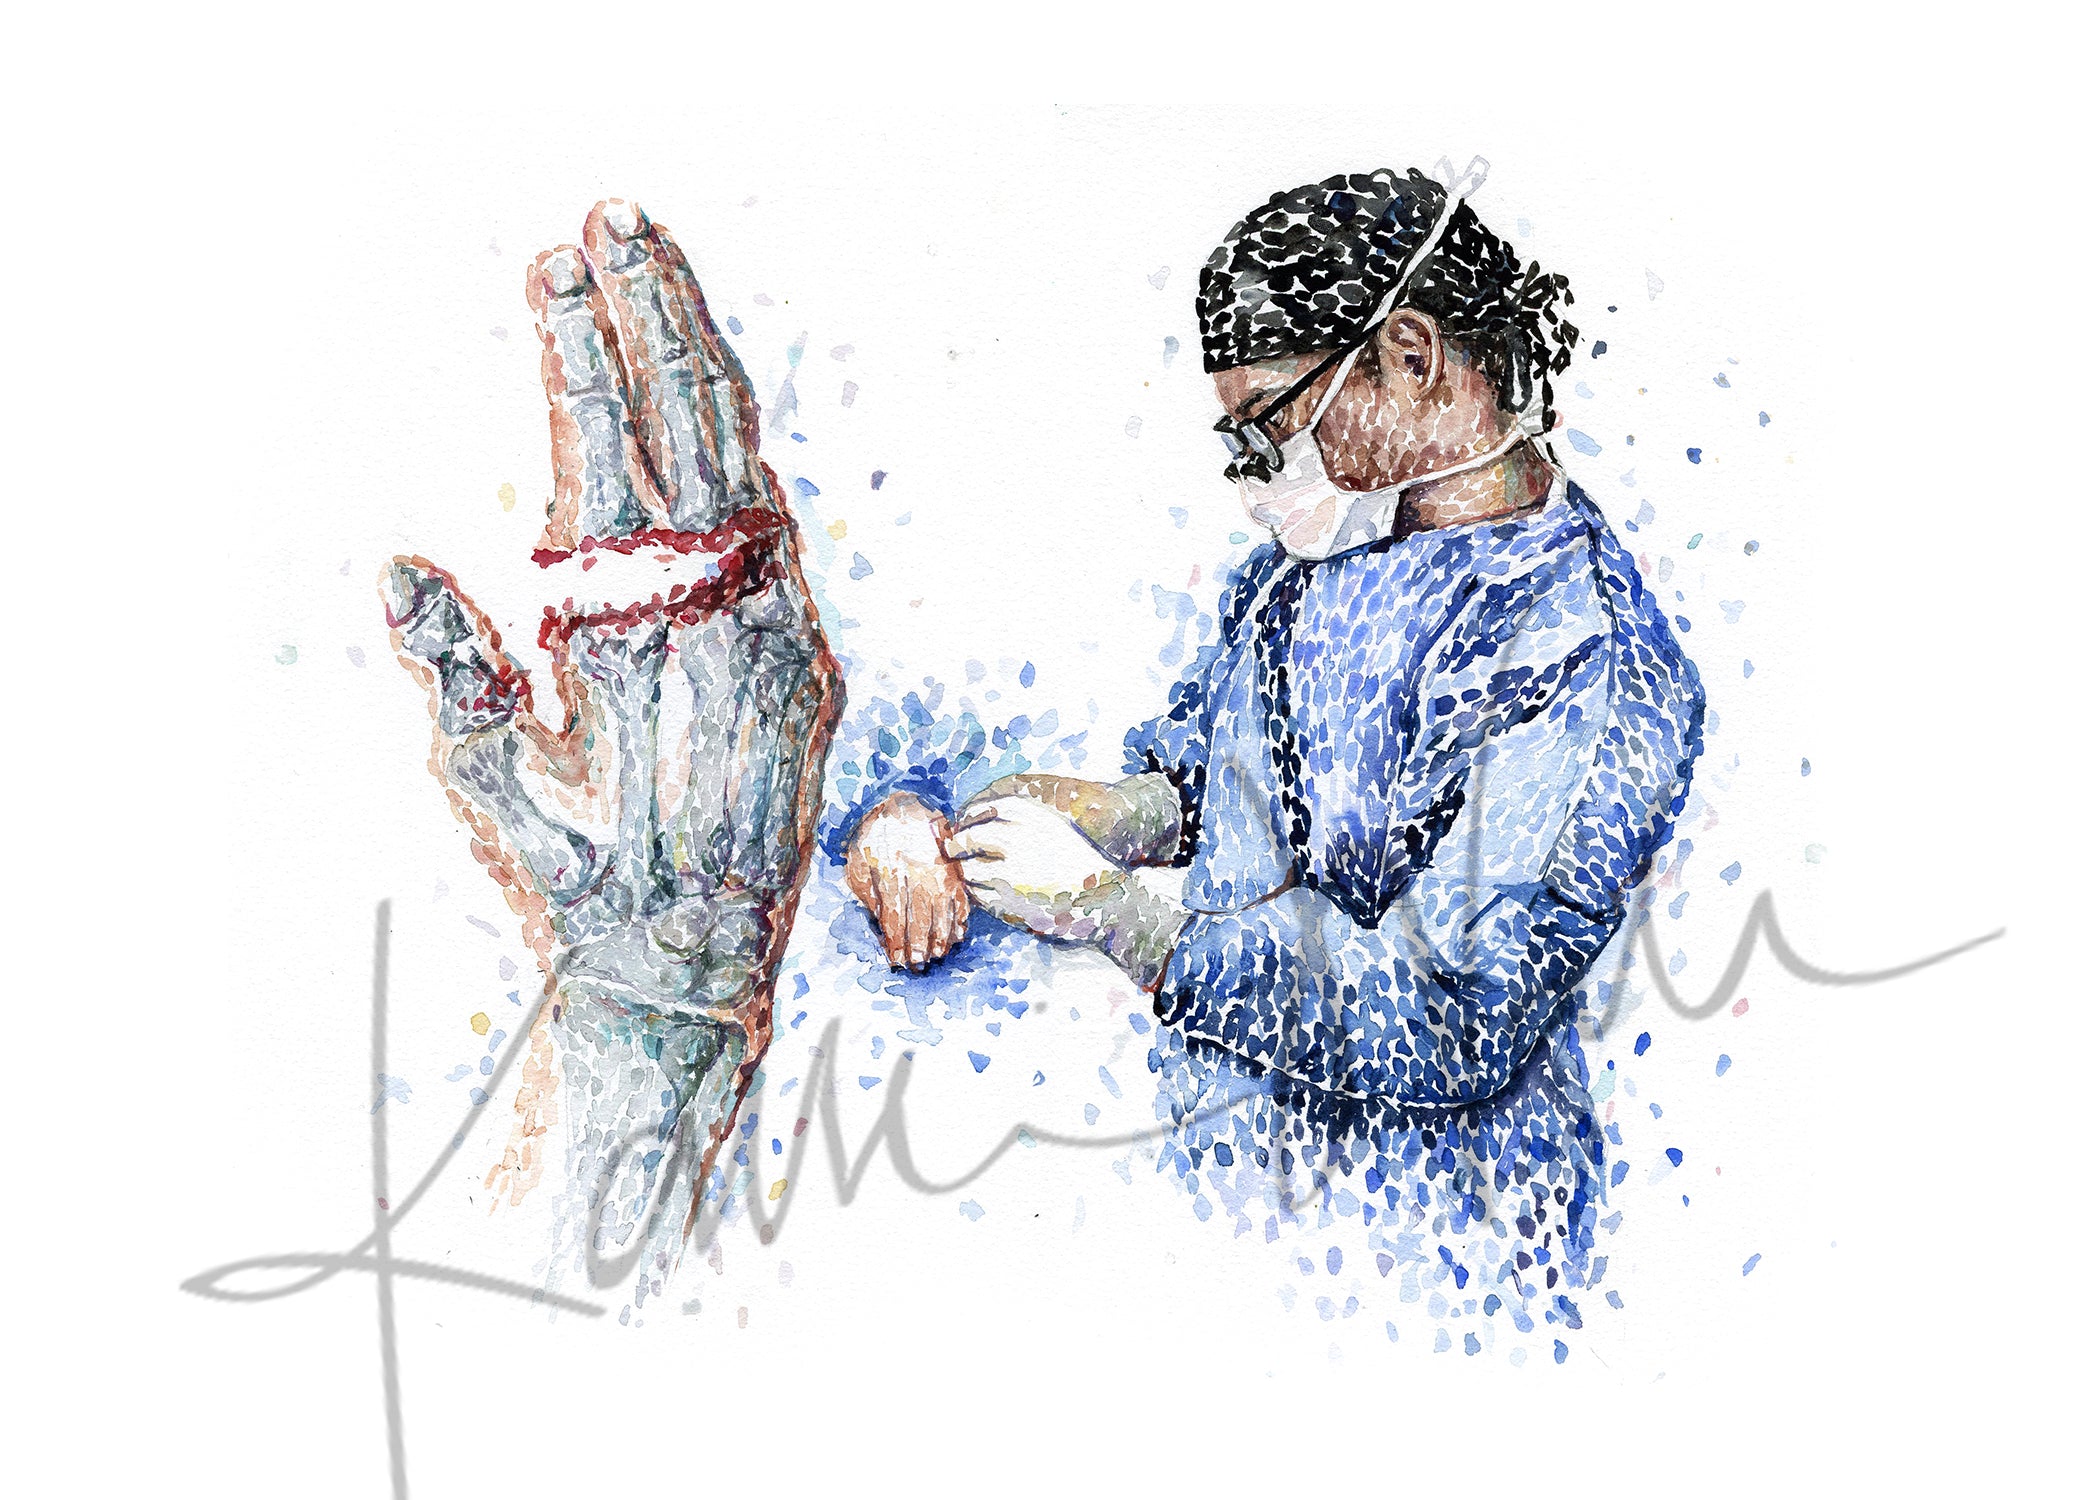 Unframed watercolor painting of a finger amputation surgery.